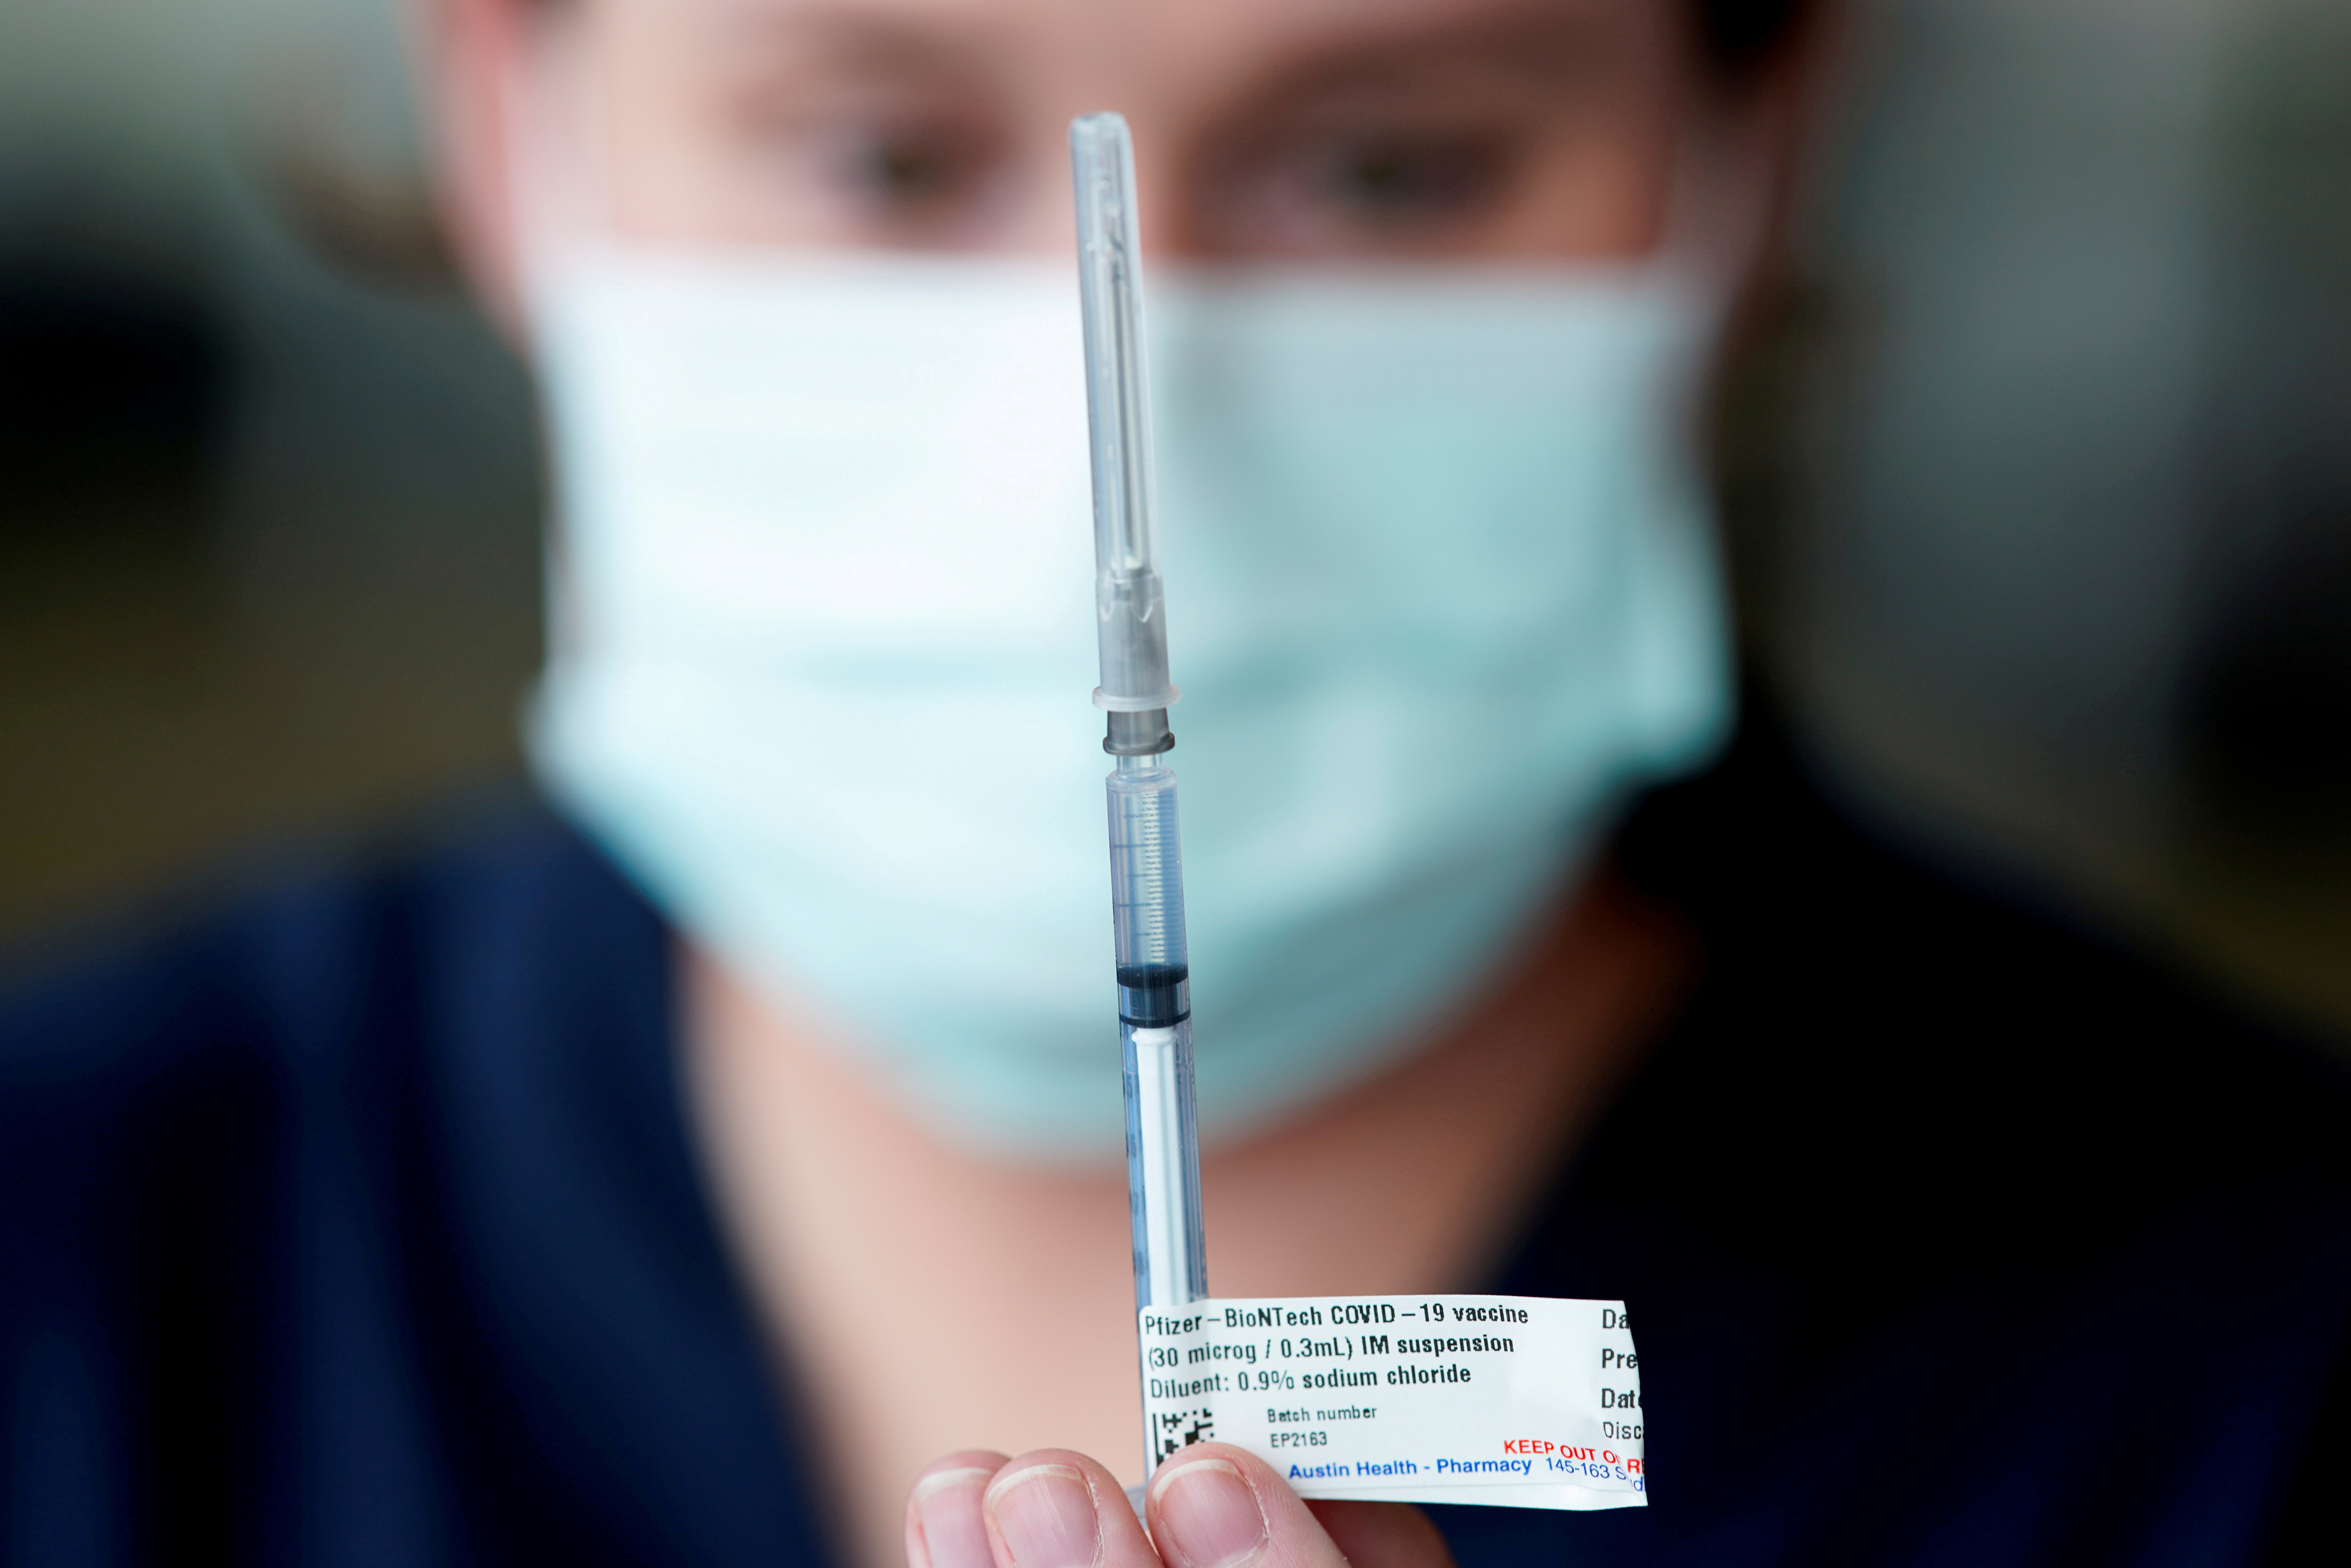 The Pfizer COVID-19 vaccine is prepared by a healthcare worker in Melbourne